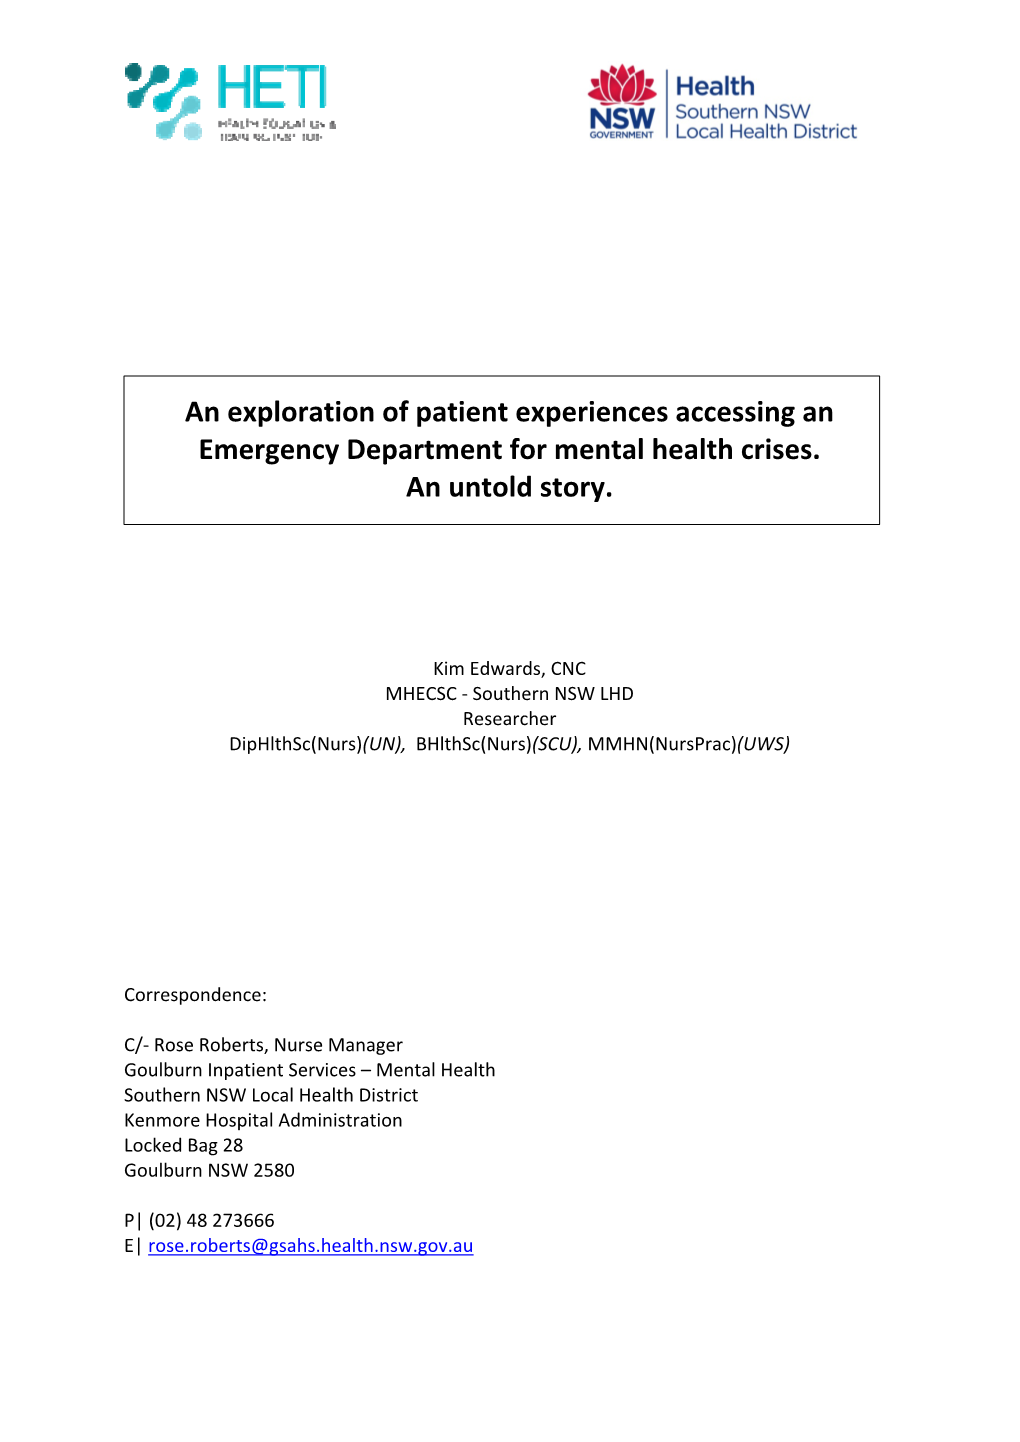 An Exploration of Patient Experiences Accessing an Emergency Department for Mental Health Crises